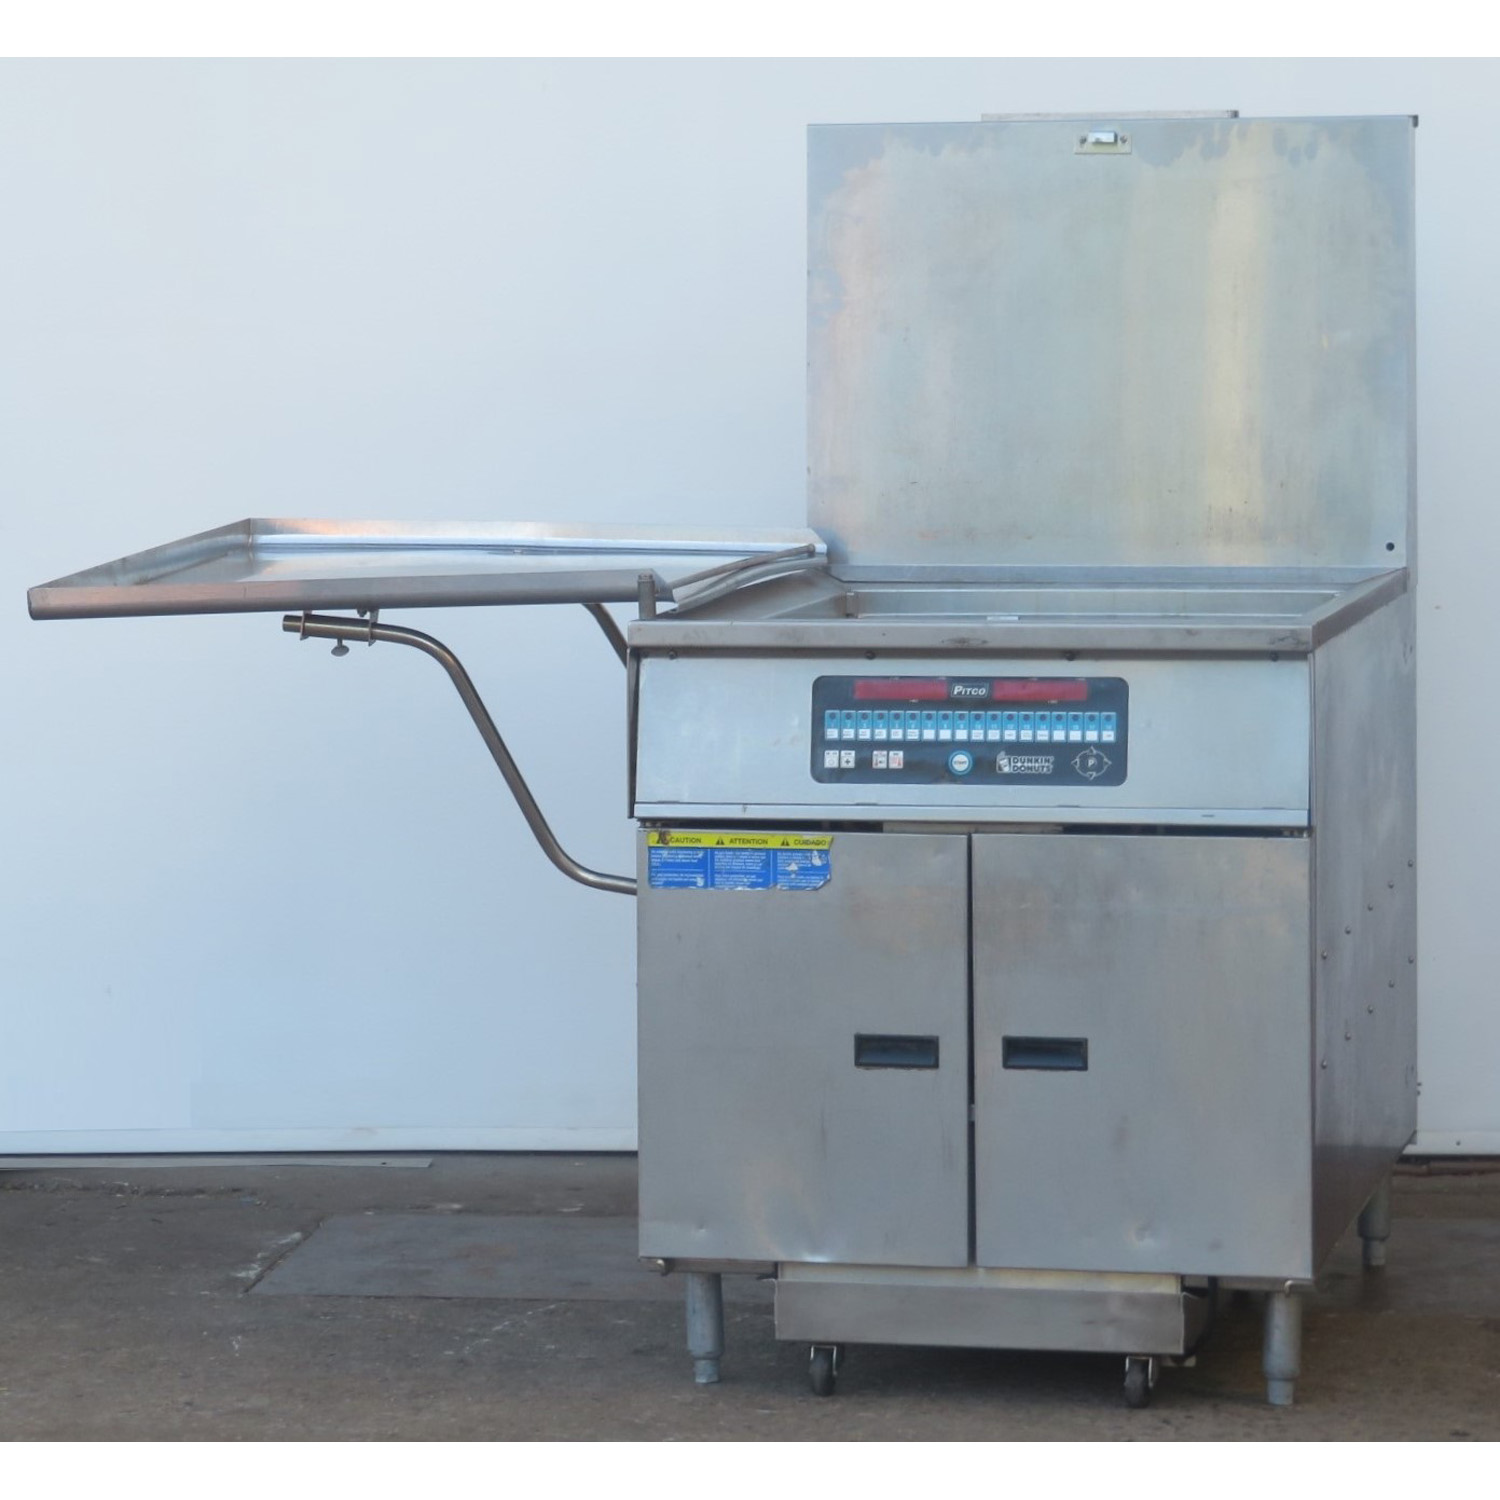 Pitco DD24RUFM Gas Donut Fryer with Oil Filter, Used Great Condition